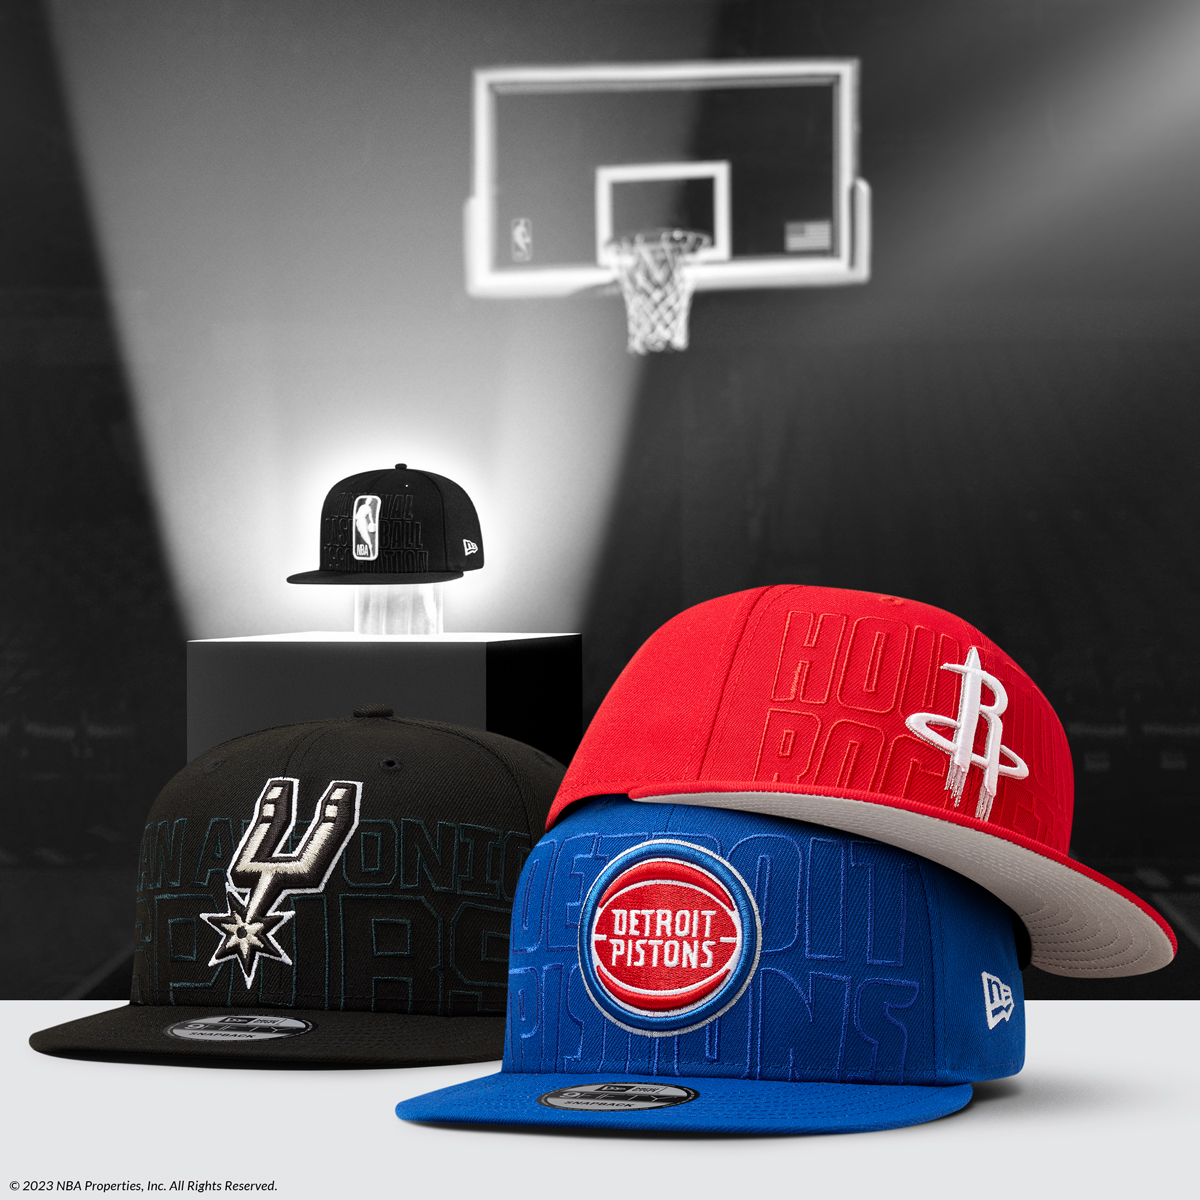 Detroit Pistons - Like the graphic says, cap off your